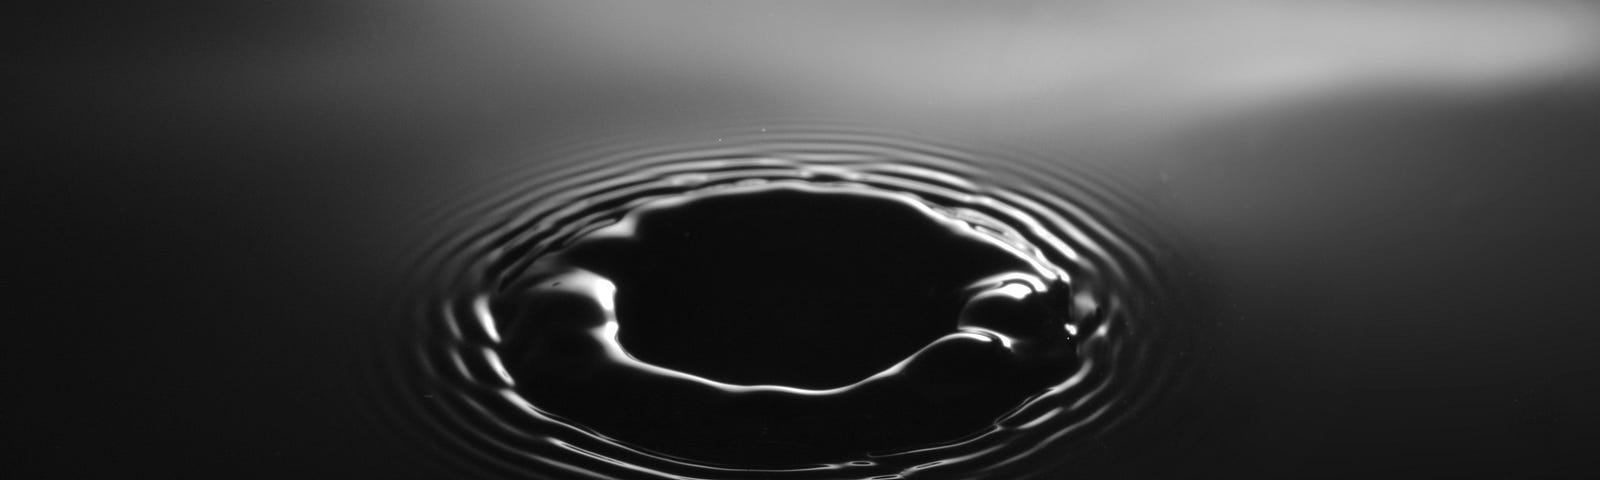 Ripples in a pool of water